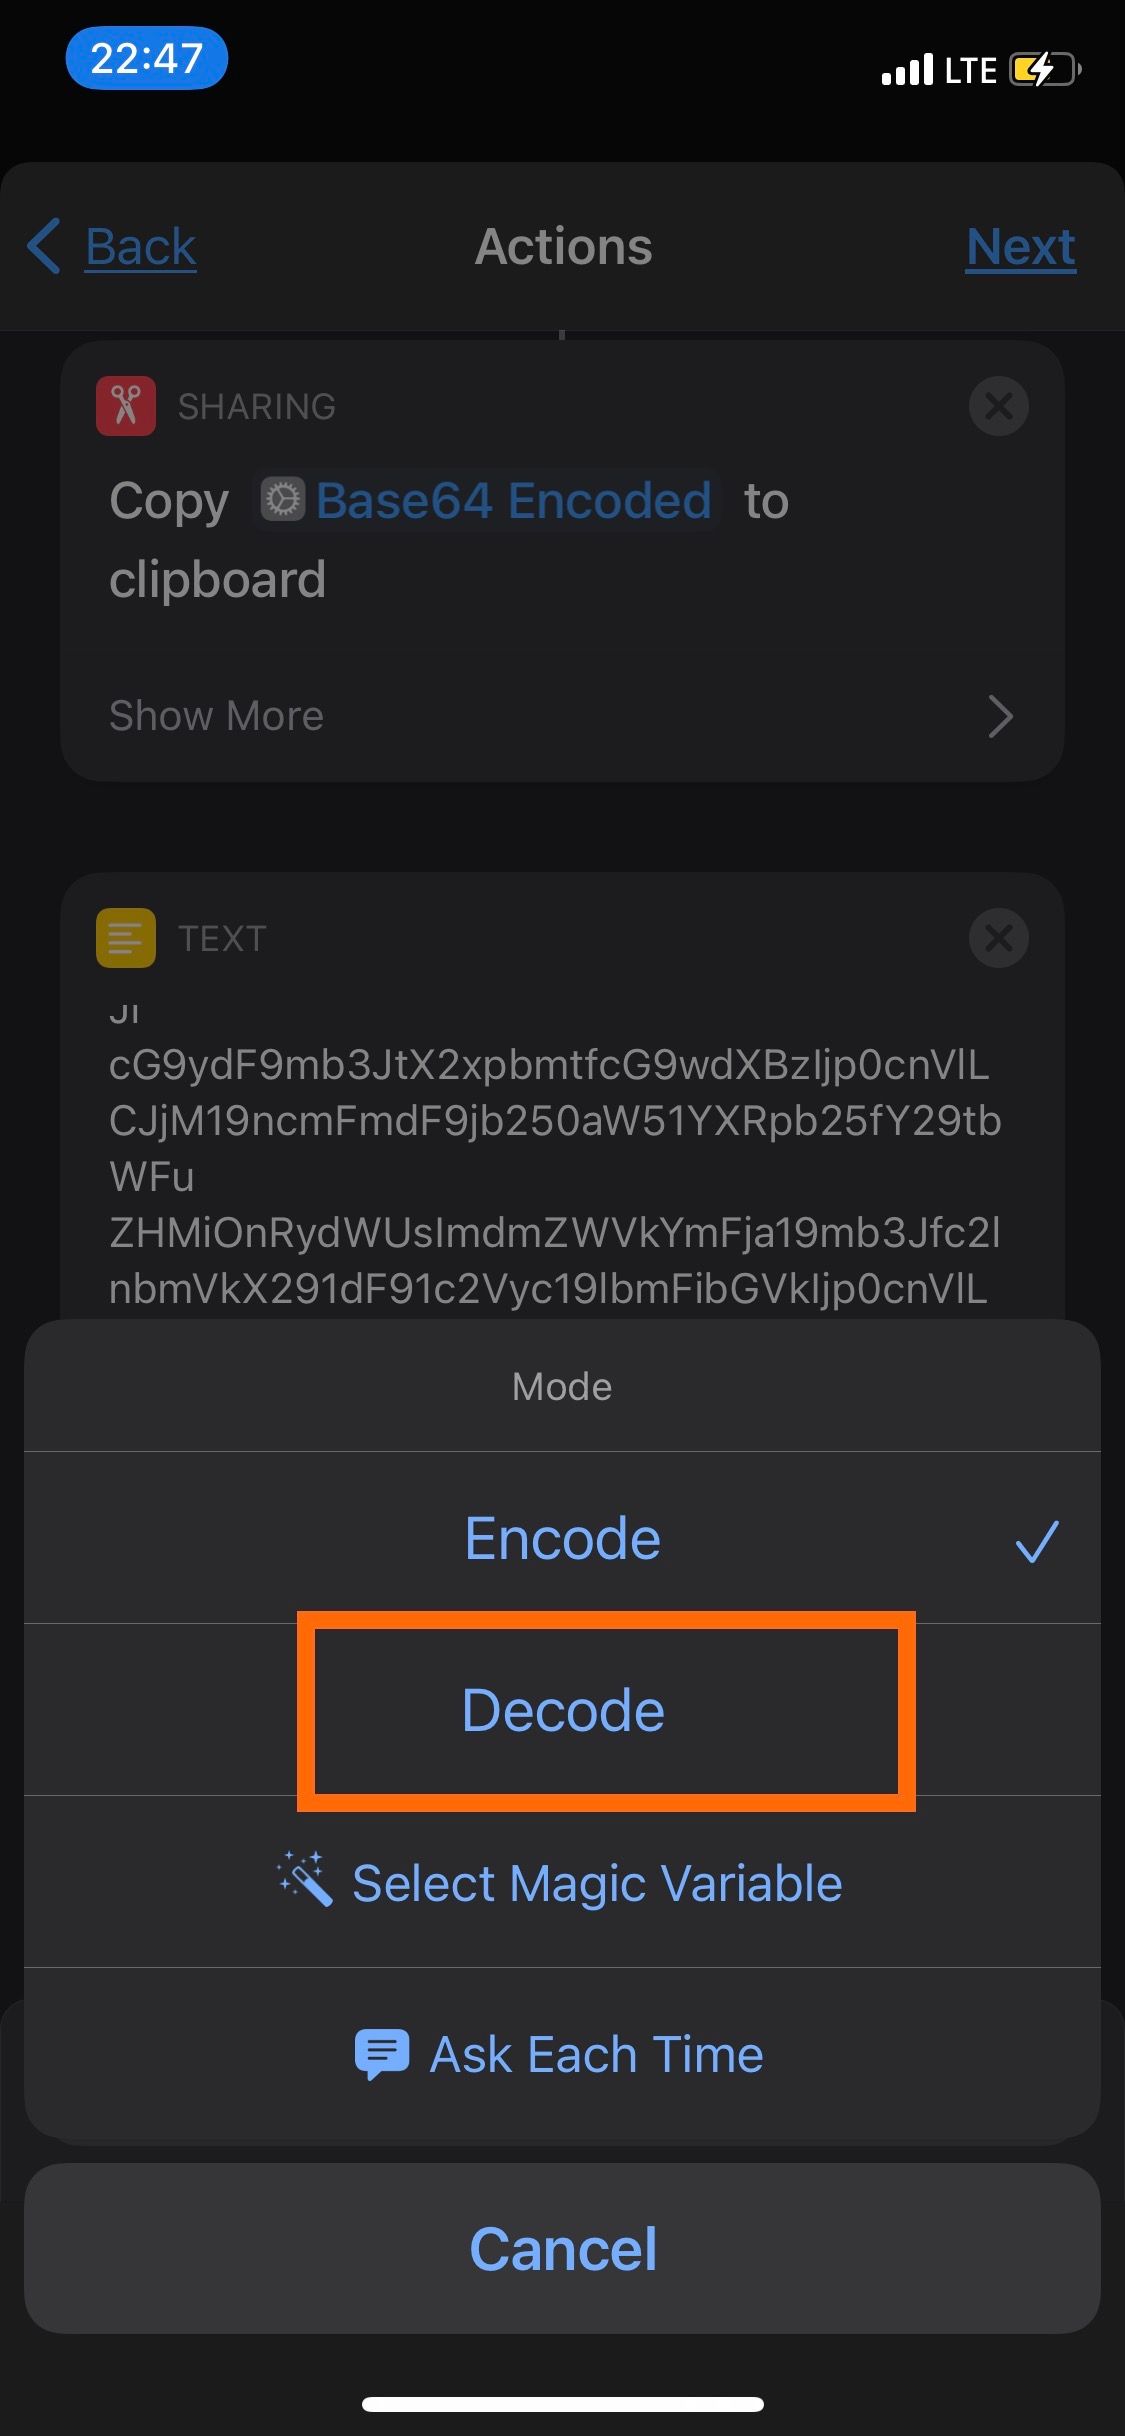 Decode option for Encode action in Shortcuts app.